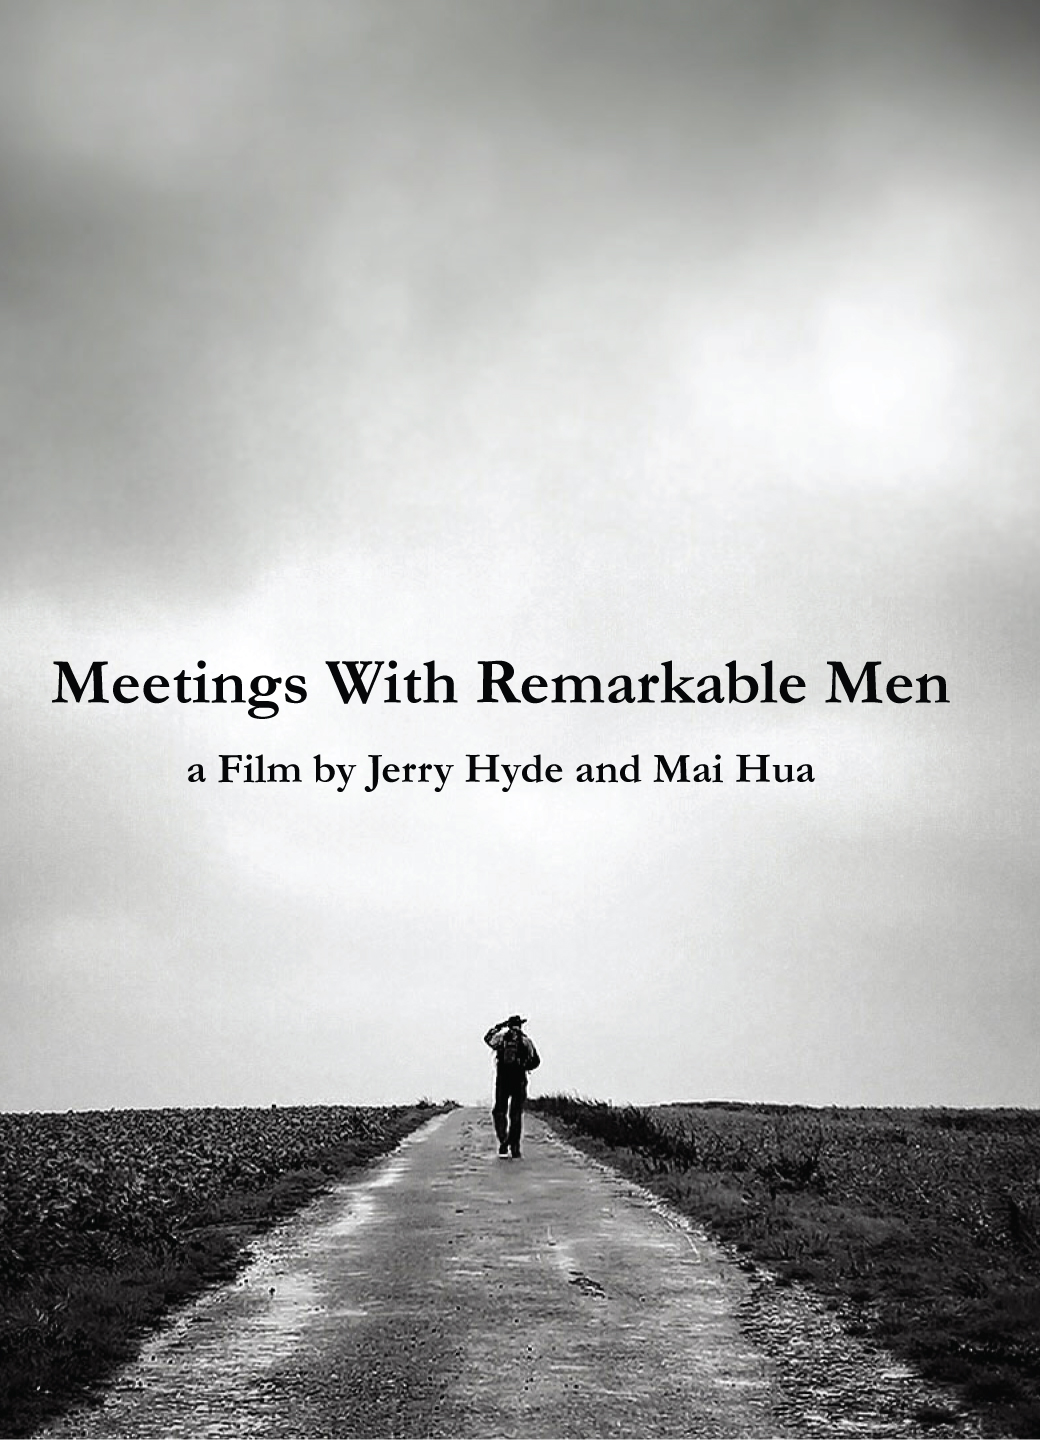 Meetings with Remarkable Men